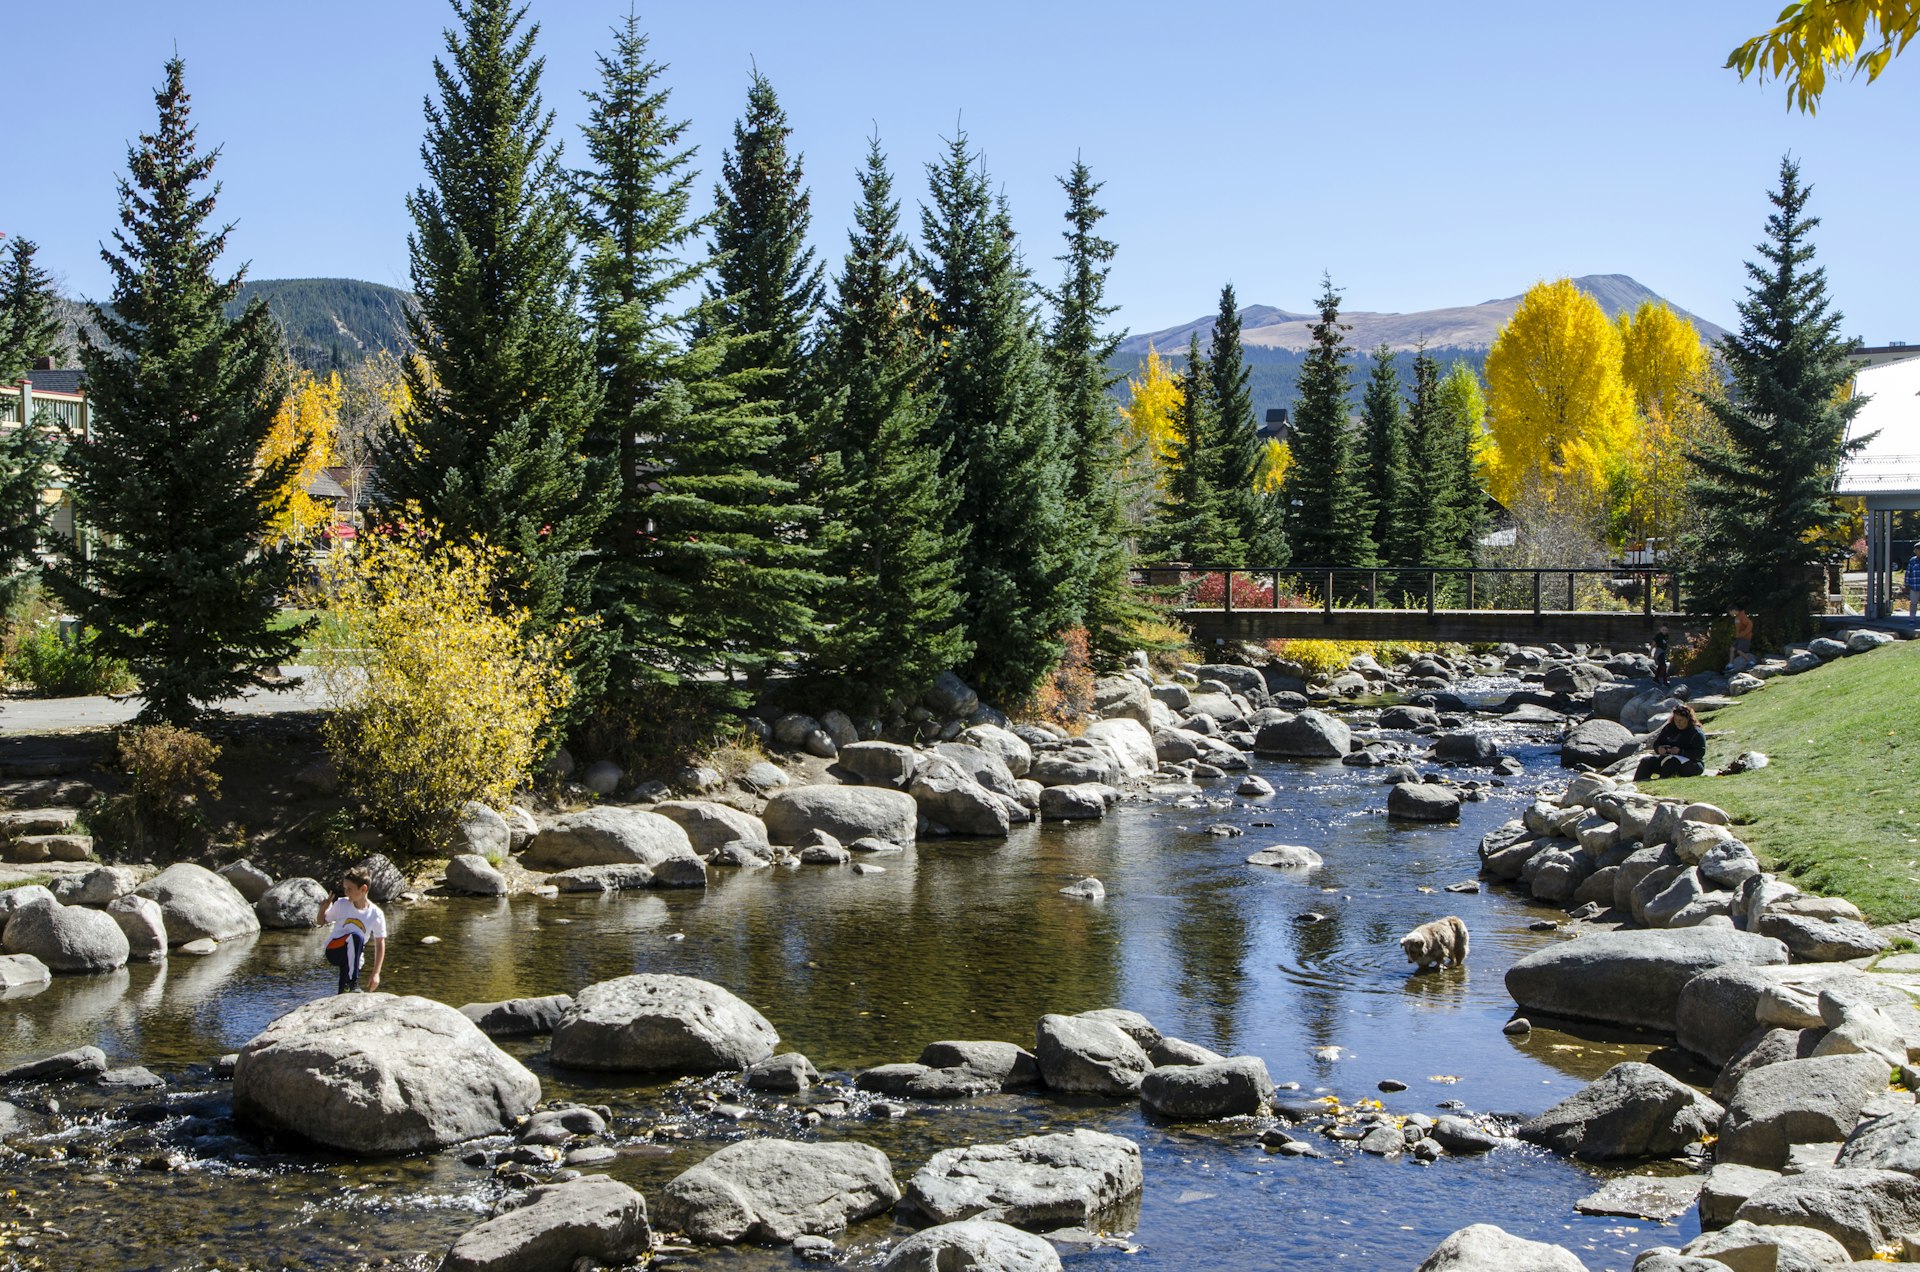 Dog playing in a river in Breckenridge, Colorado